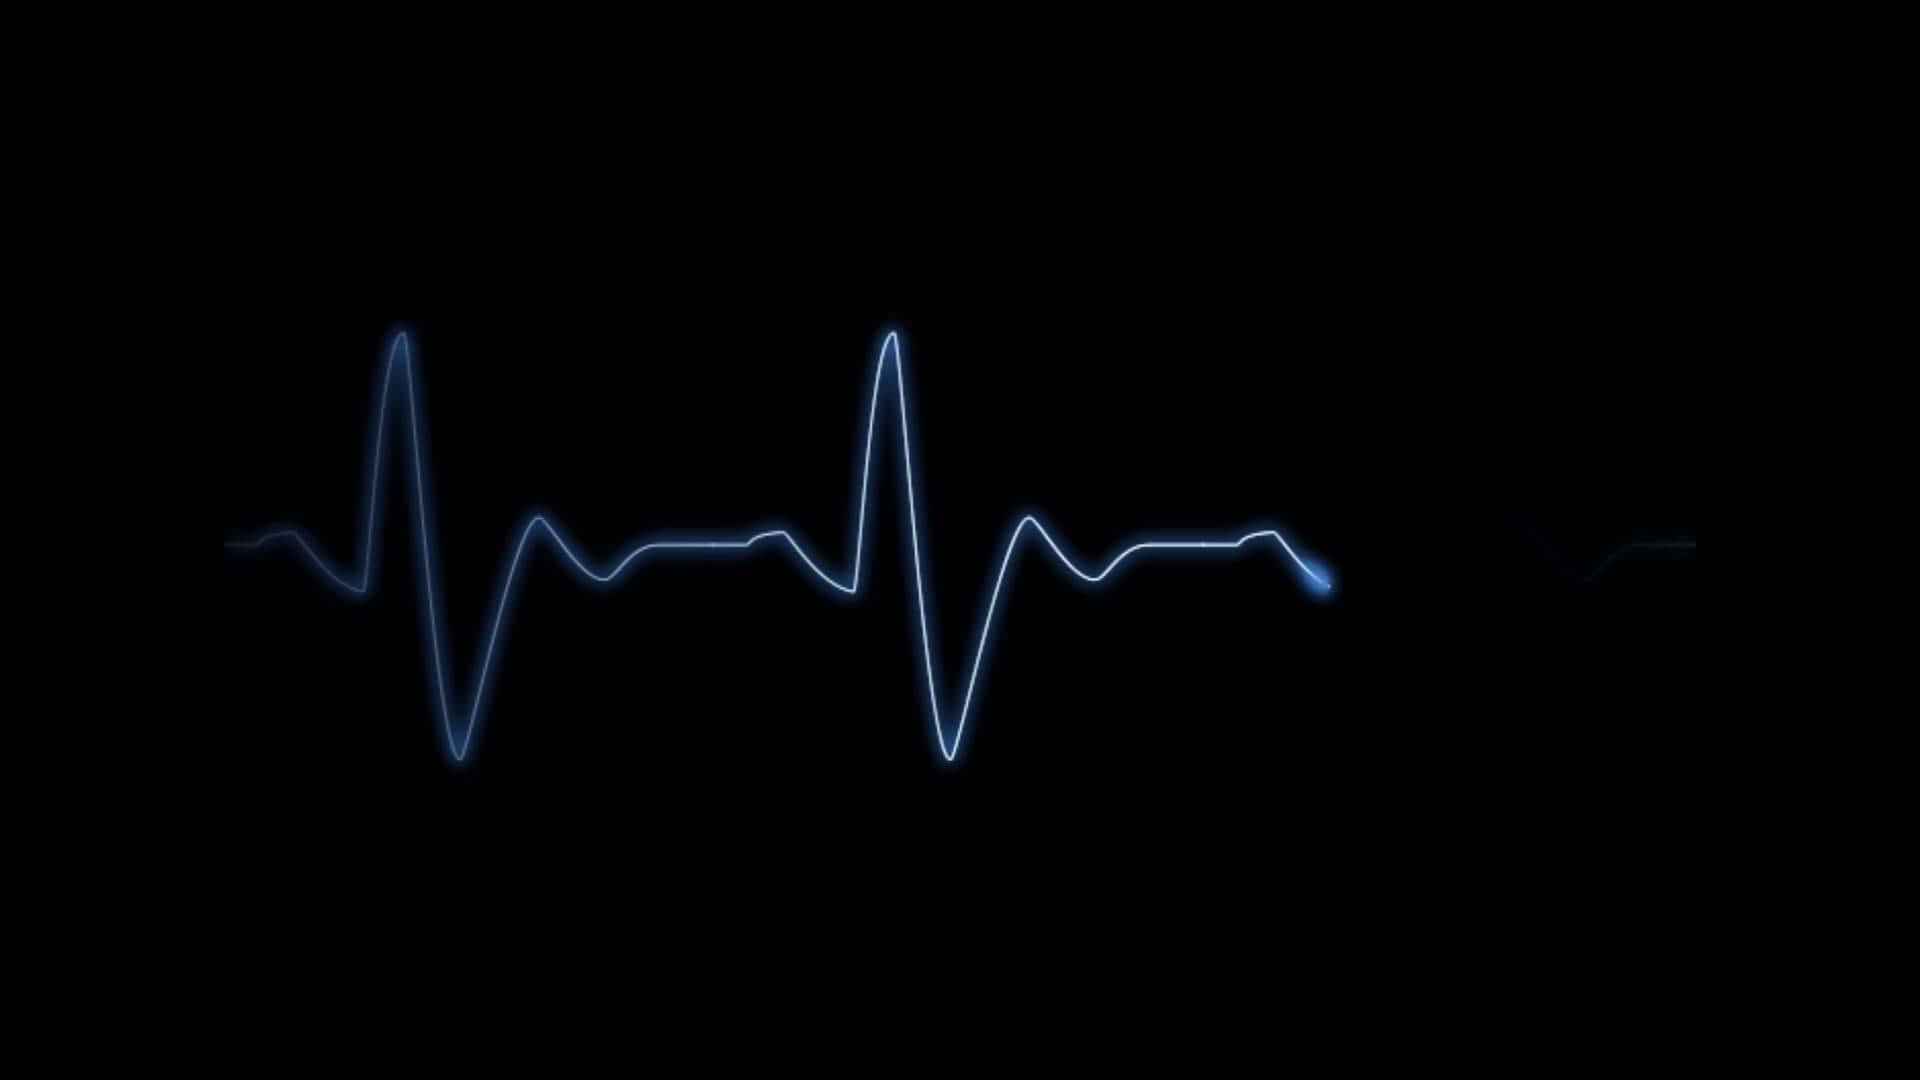 Tracking the Beat - Heart Rate Monitoring Wallpaper